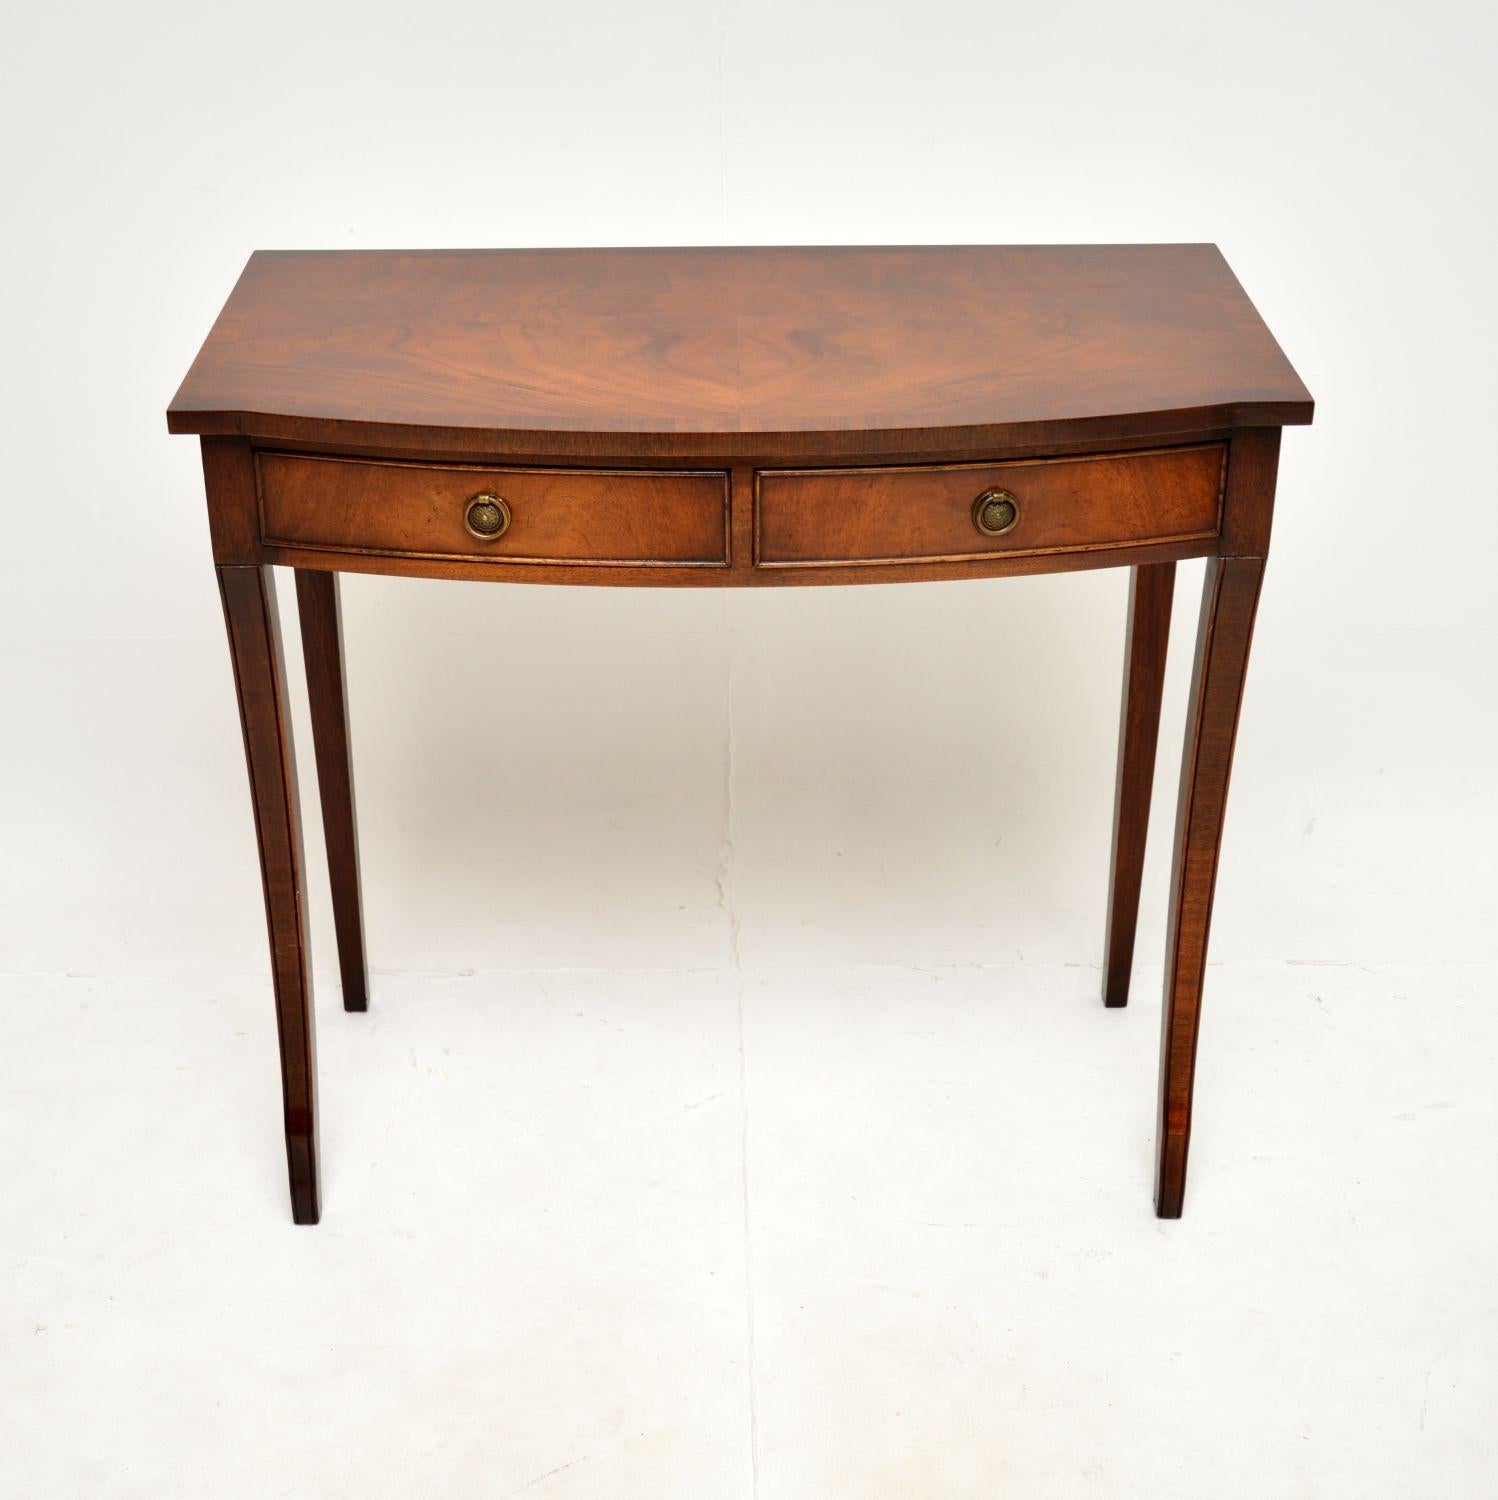 An elegant and very well made antique Regency style console table. This was made in England, it dates from around the 1950’s.

This is of excellent quality and is a great size to be used as a console table or even an occasional desk / writing